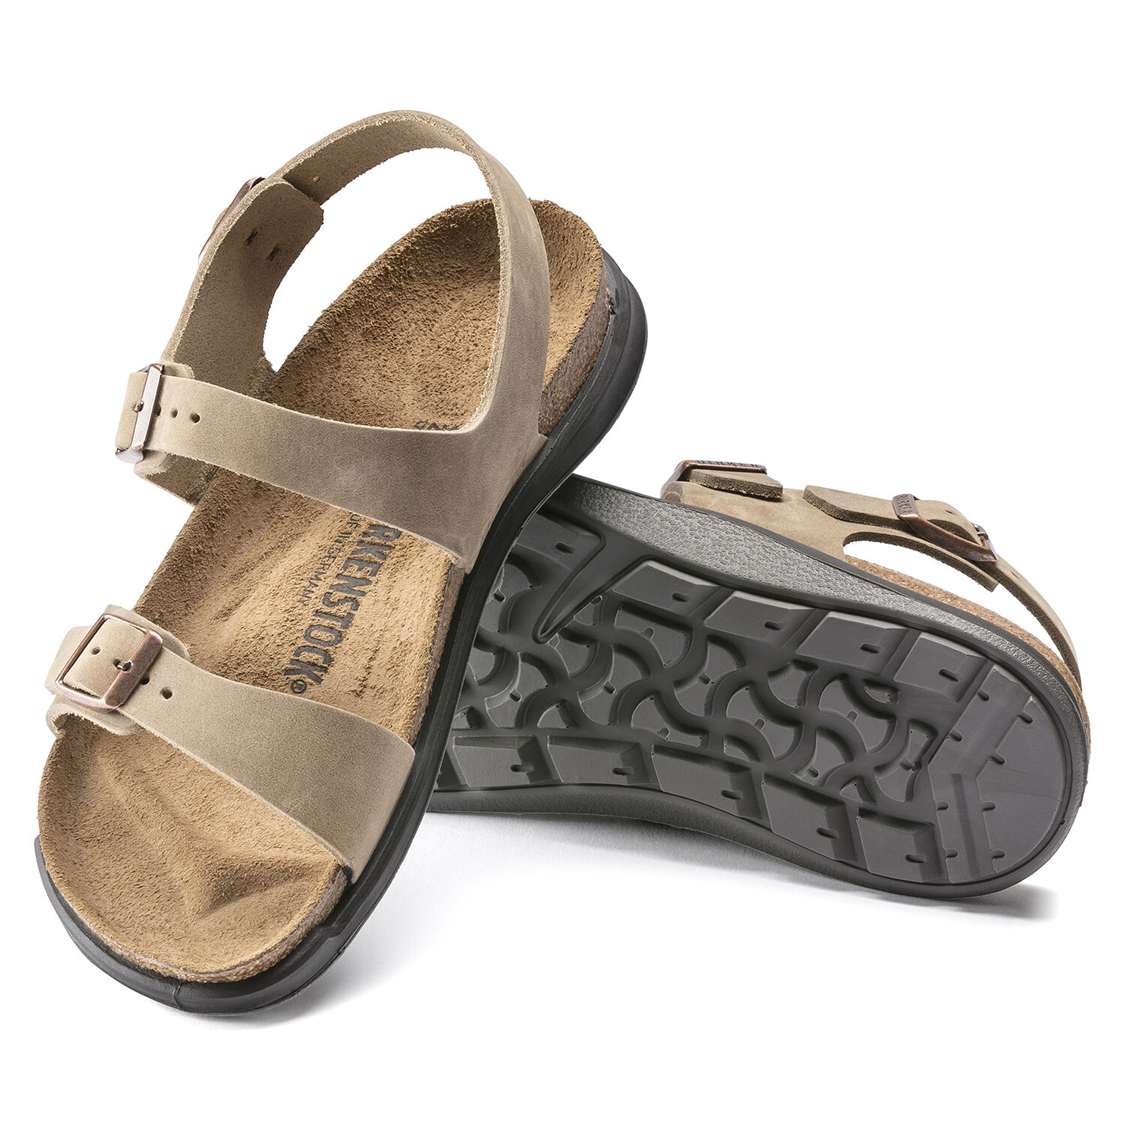 Birkenstock Sonora Oiled Leather Two Strap Sandals Brown | yIL2g3JW8RJ